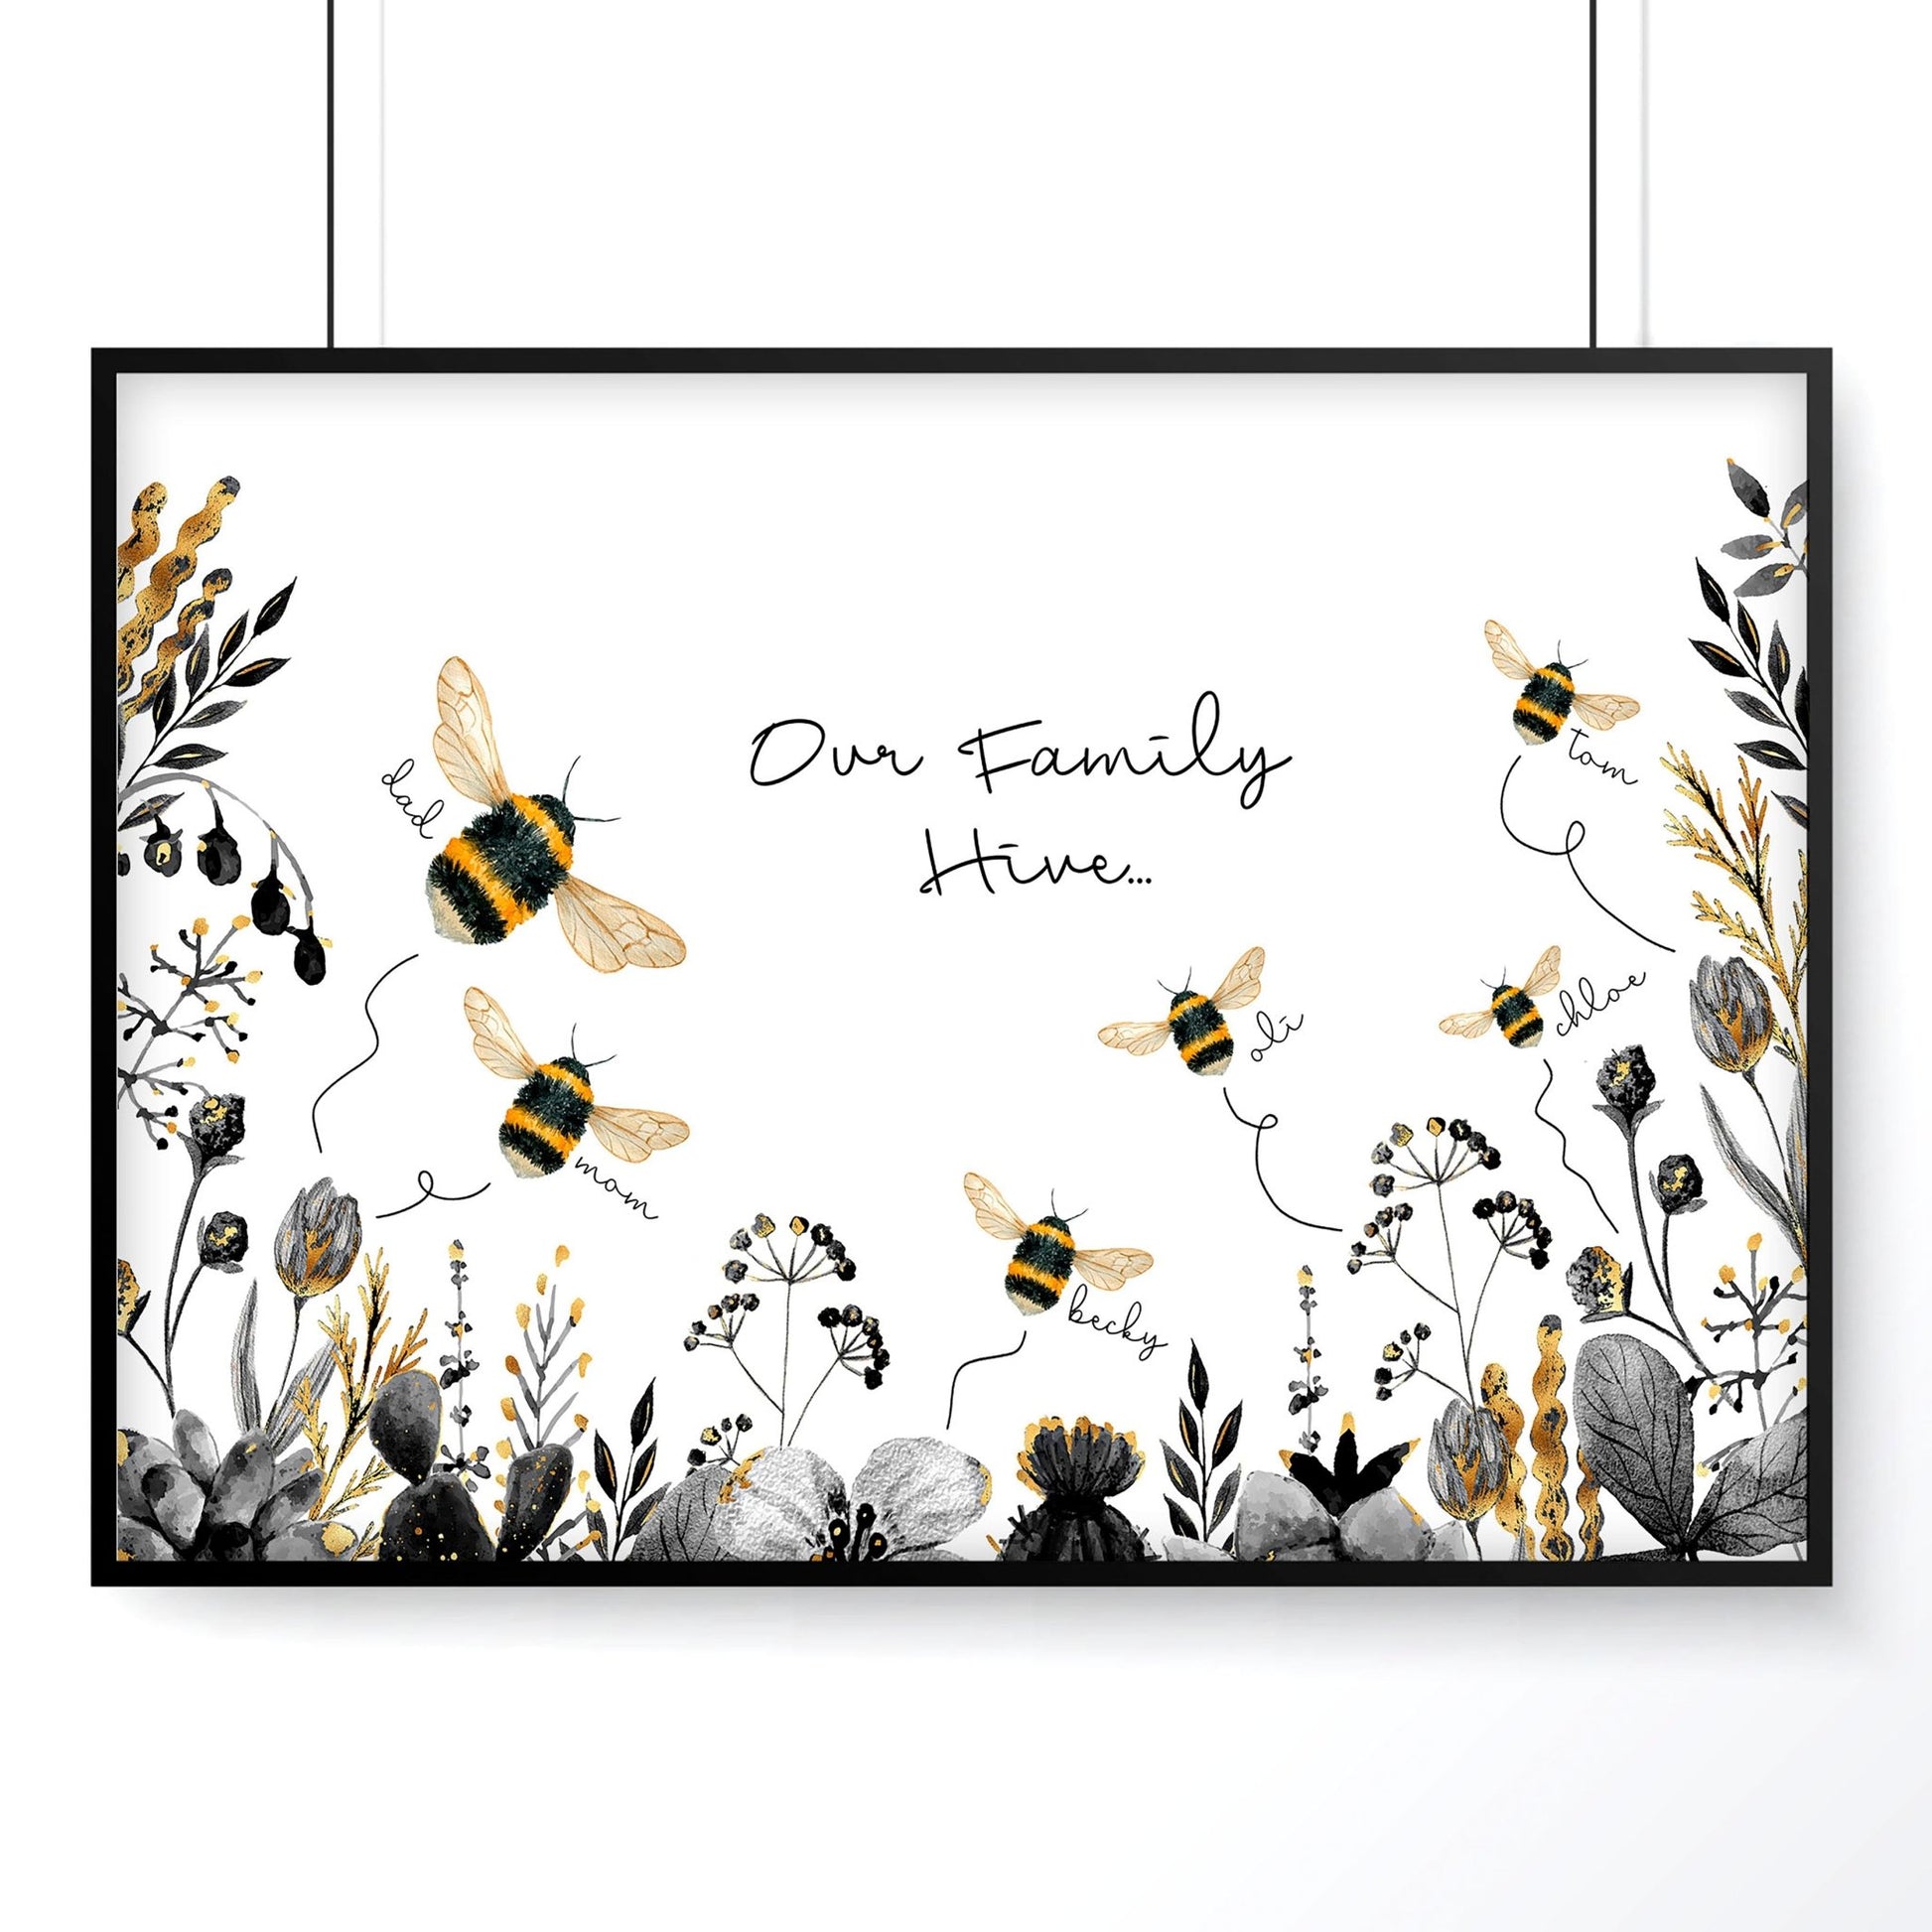 Personalized gifts for family | Bumble bee wall art - About Wall Art